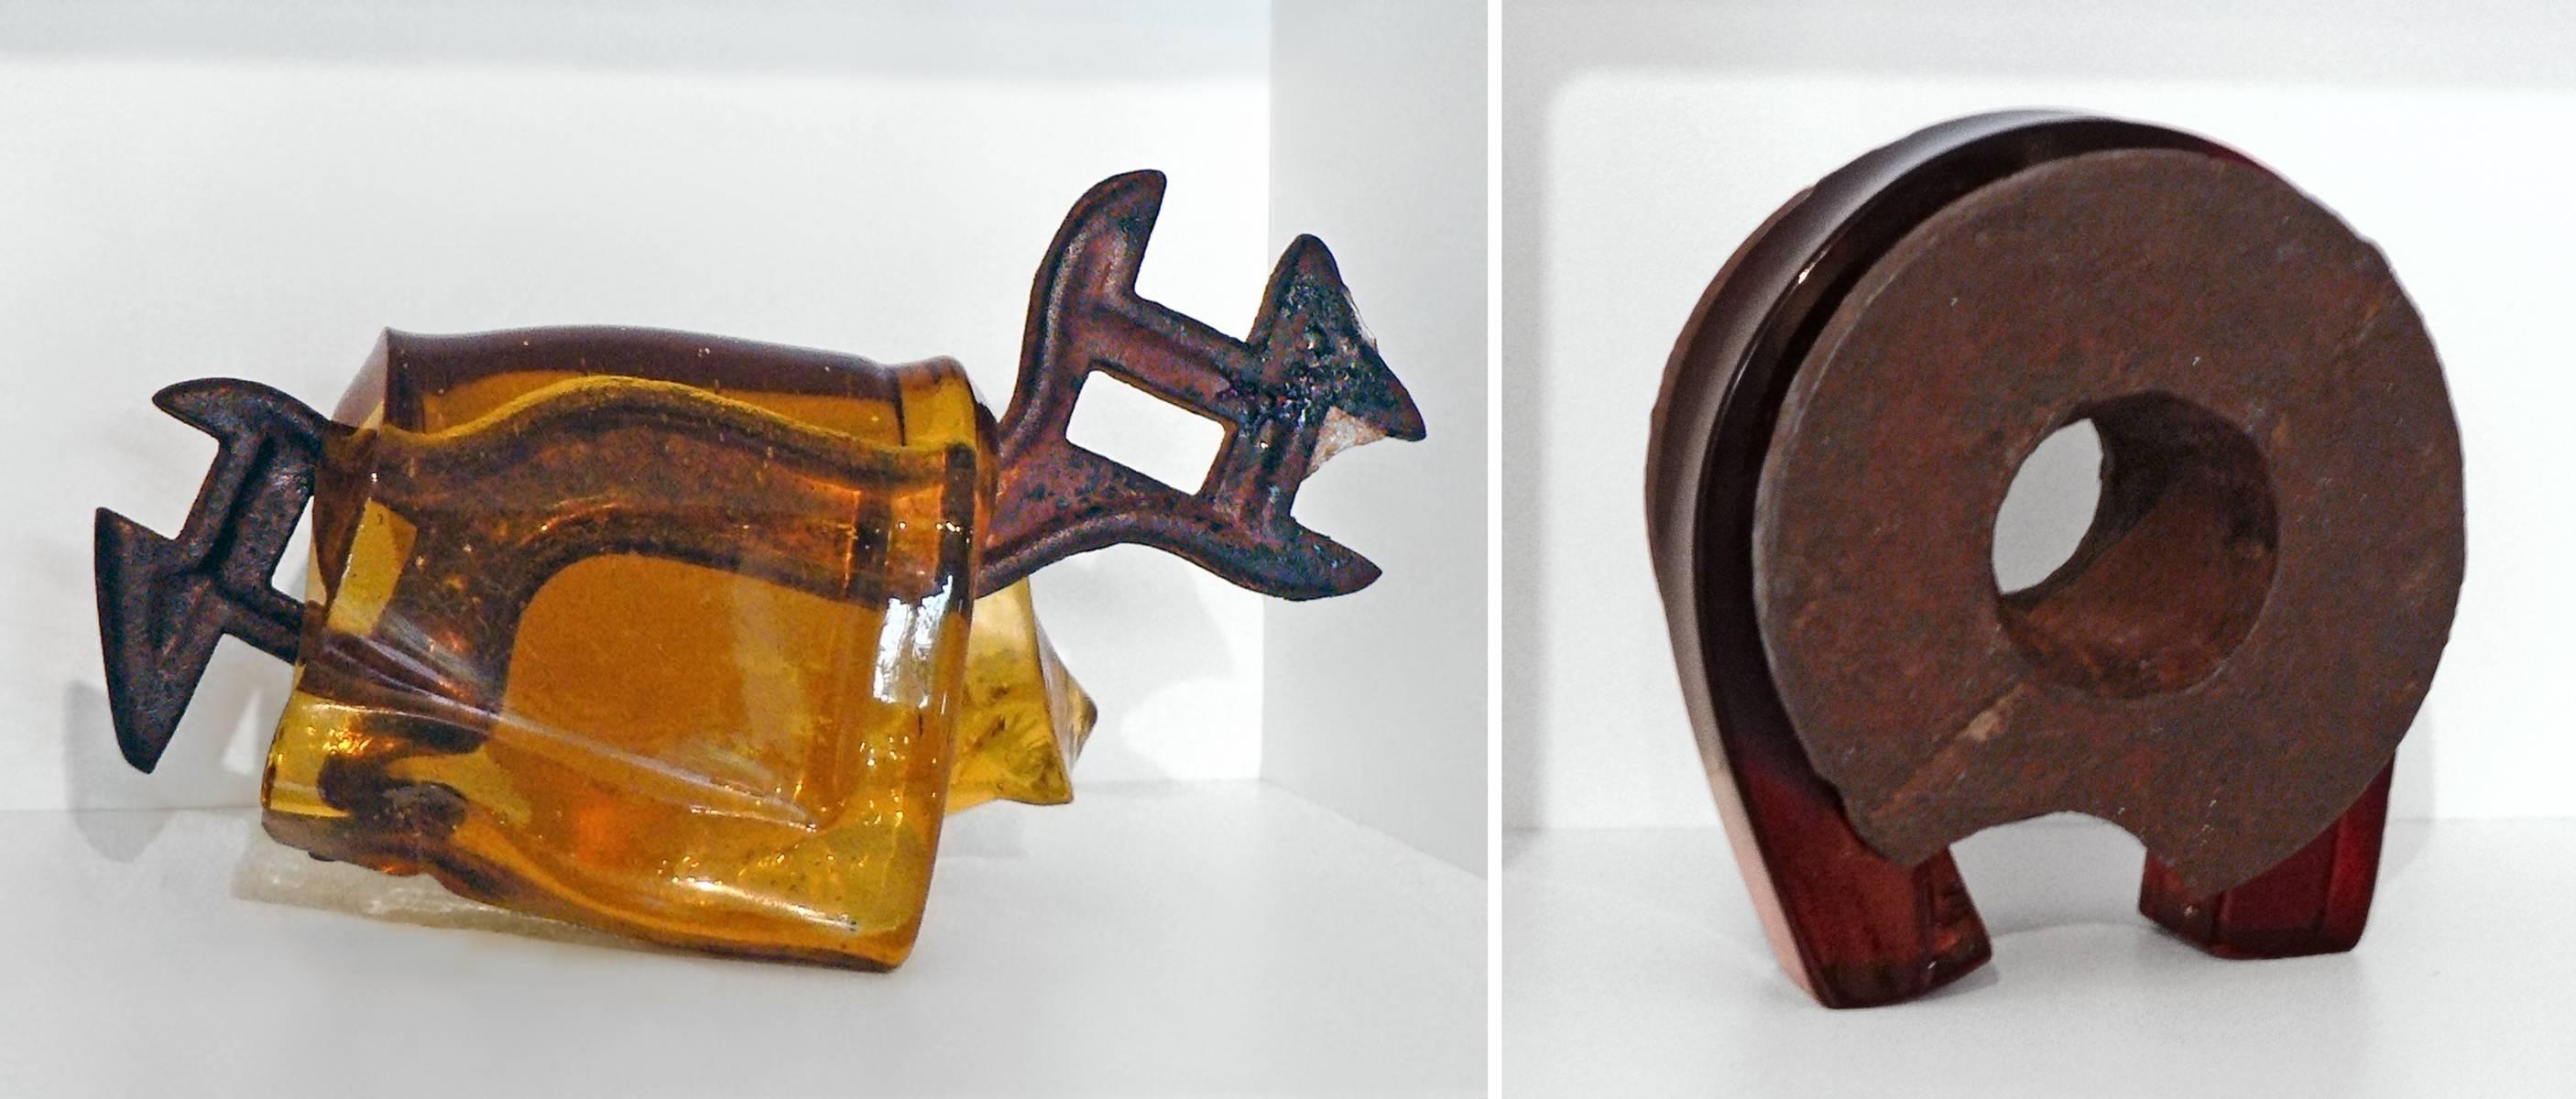 Tool-Box  - Brown Abstract Sculpture by Mary Shaffer